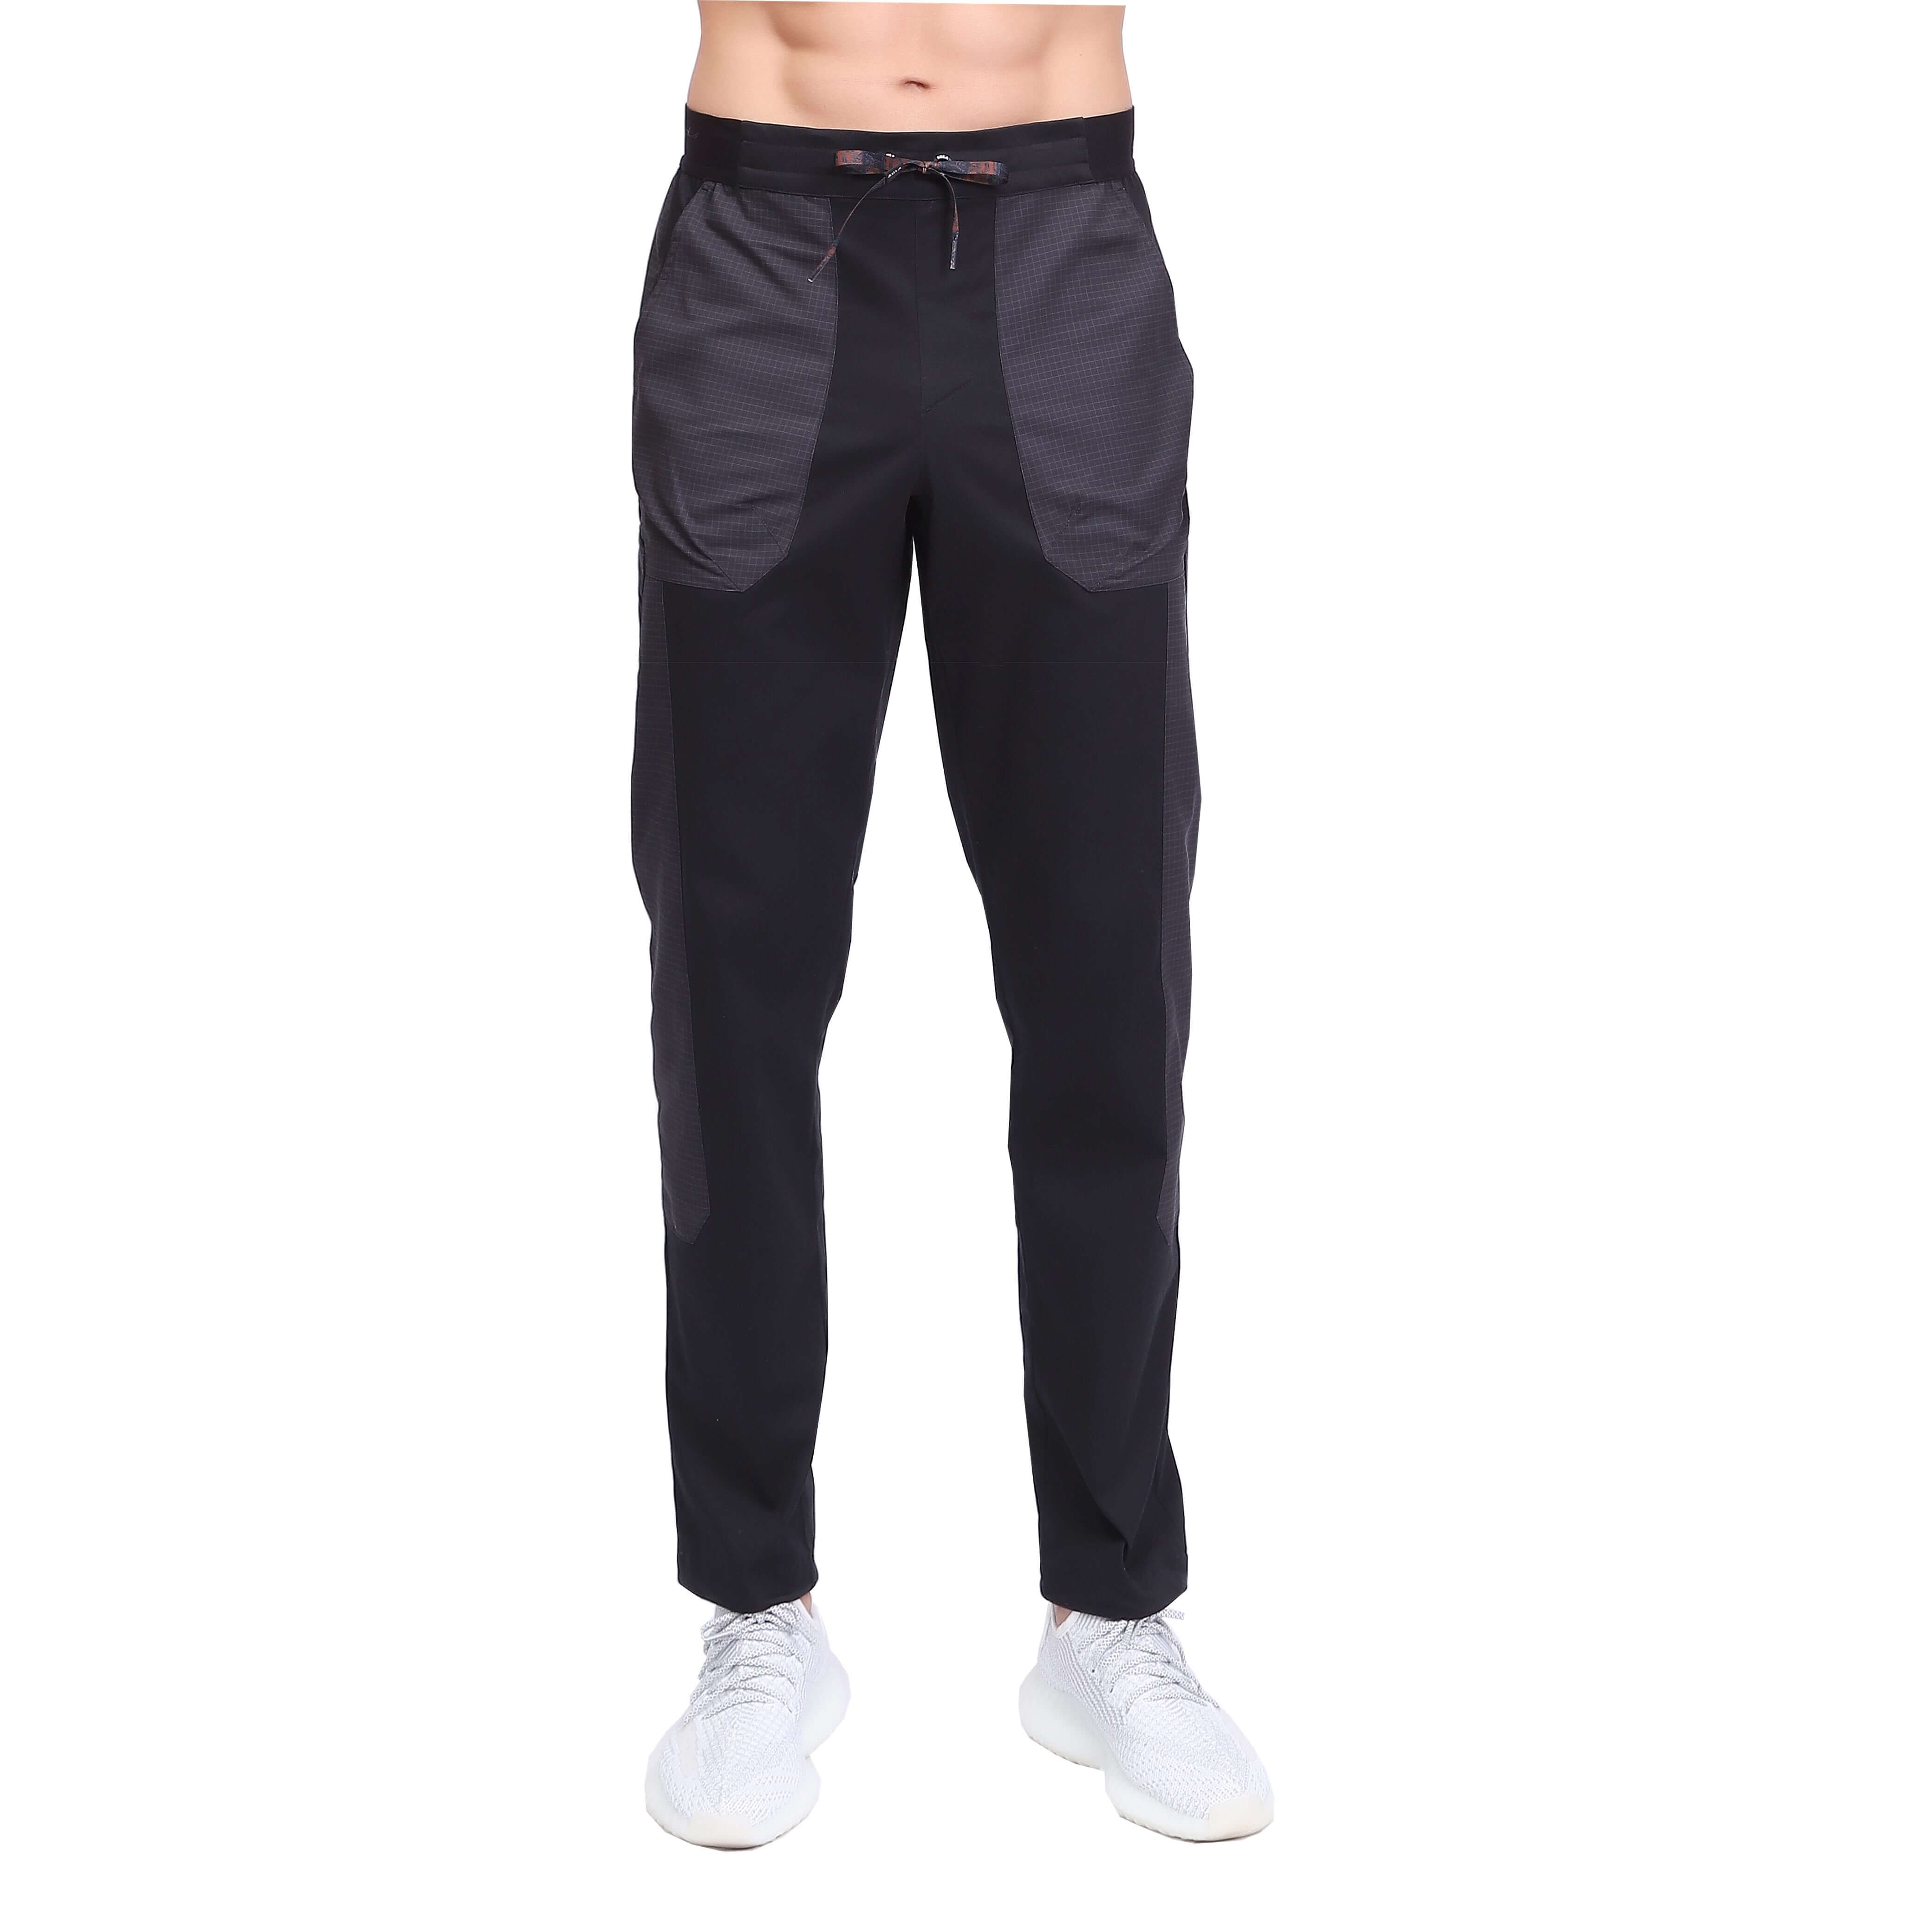 Men's Outdoor Breathable Hiking Walking Trousers 